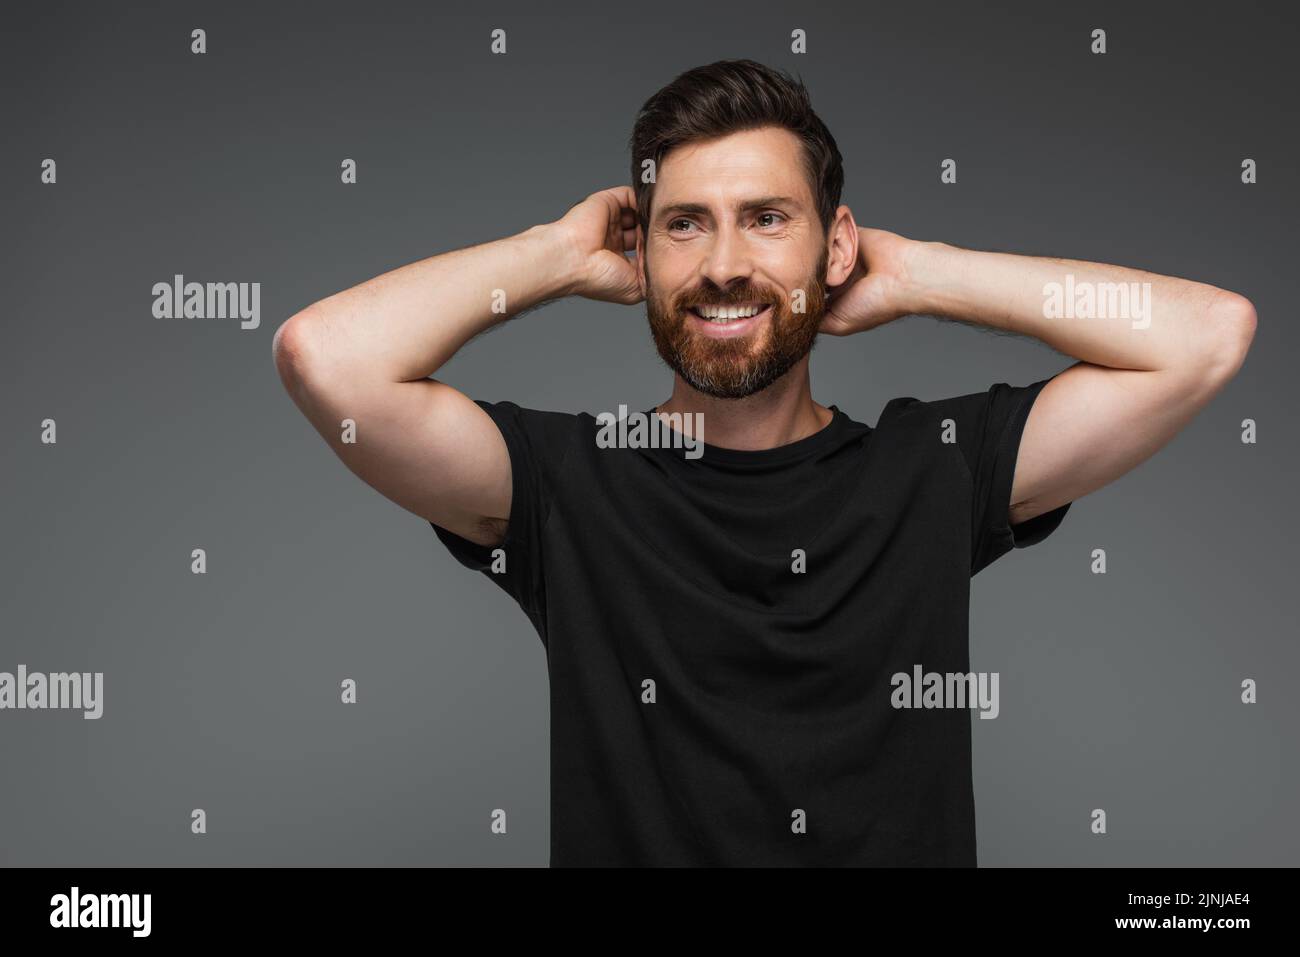 portrait of cheerful man in black t-shirt posing with hands behind head isolated on grey,stock image Stock Photo